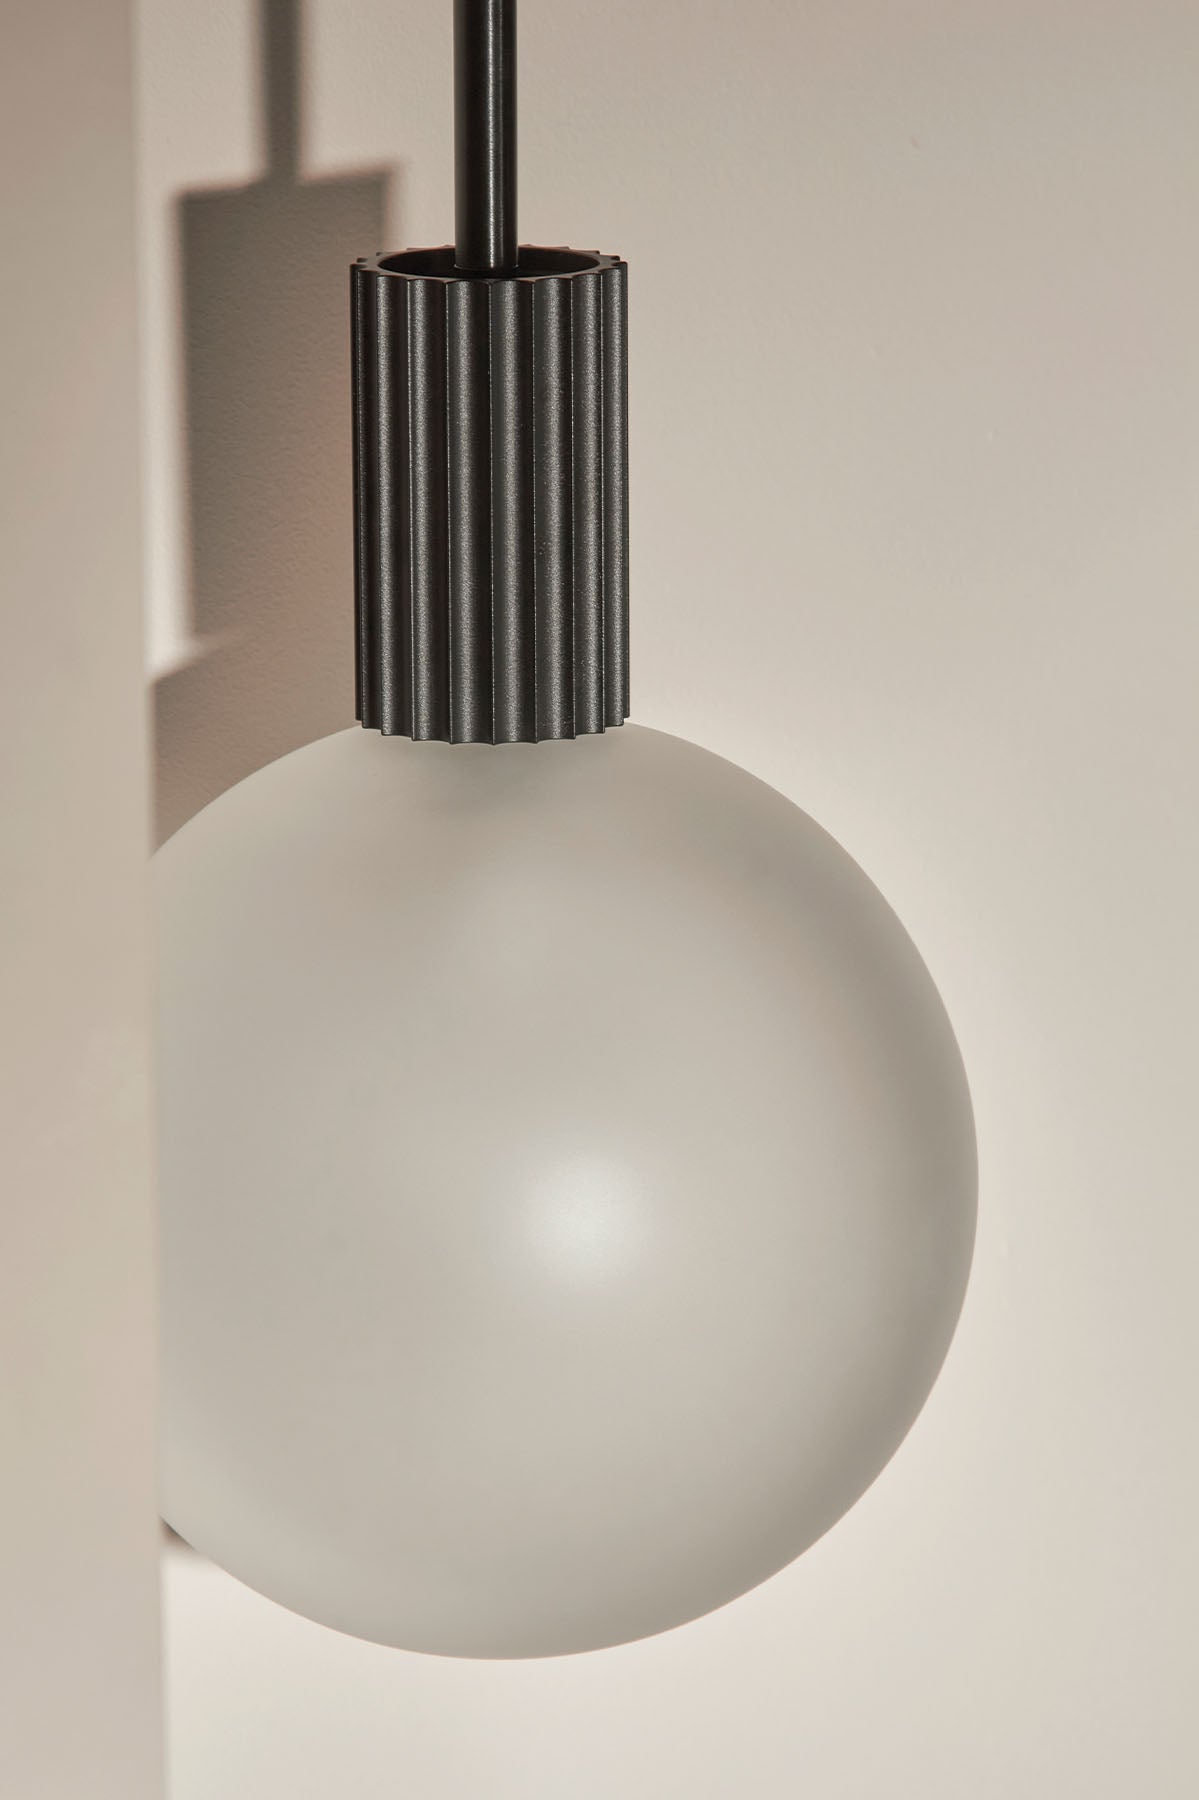 Attalos Pendant Light, 200 in Brushed Black. Image by Lawrence Furzey